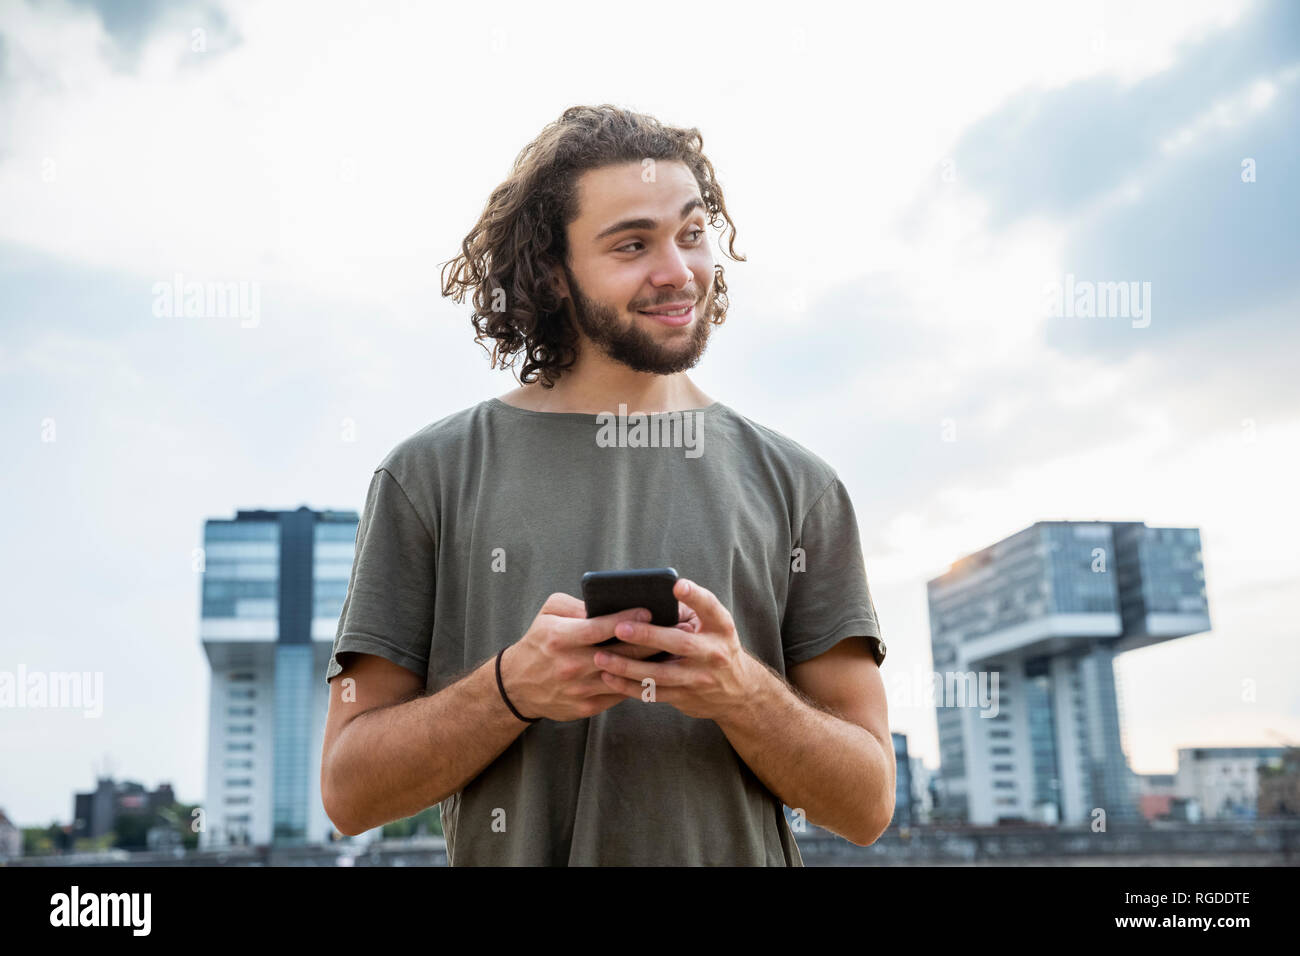 Germany, Cologne, smiling young man holding cell phone looking sideways Stock Photo